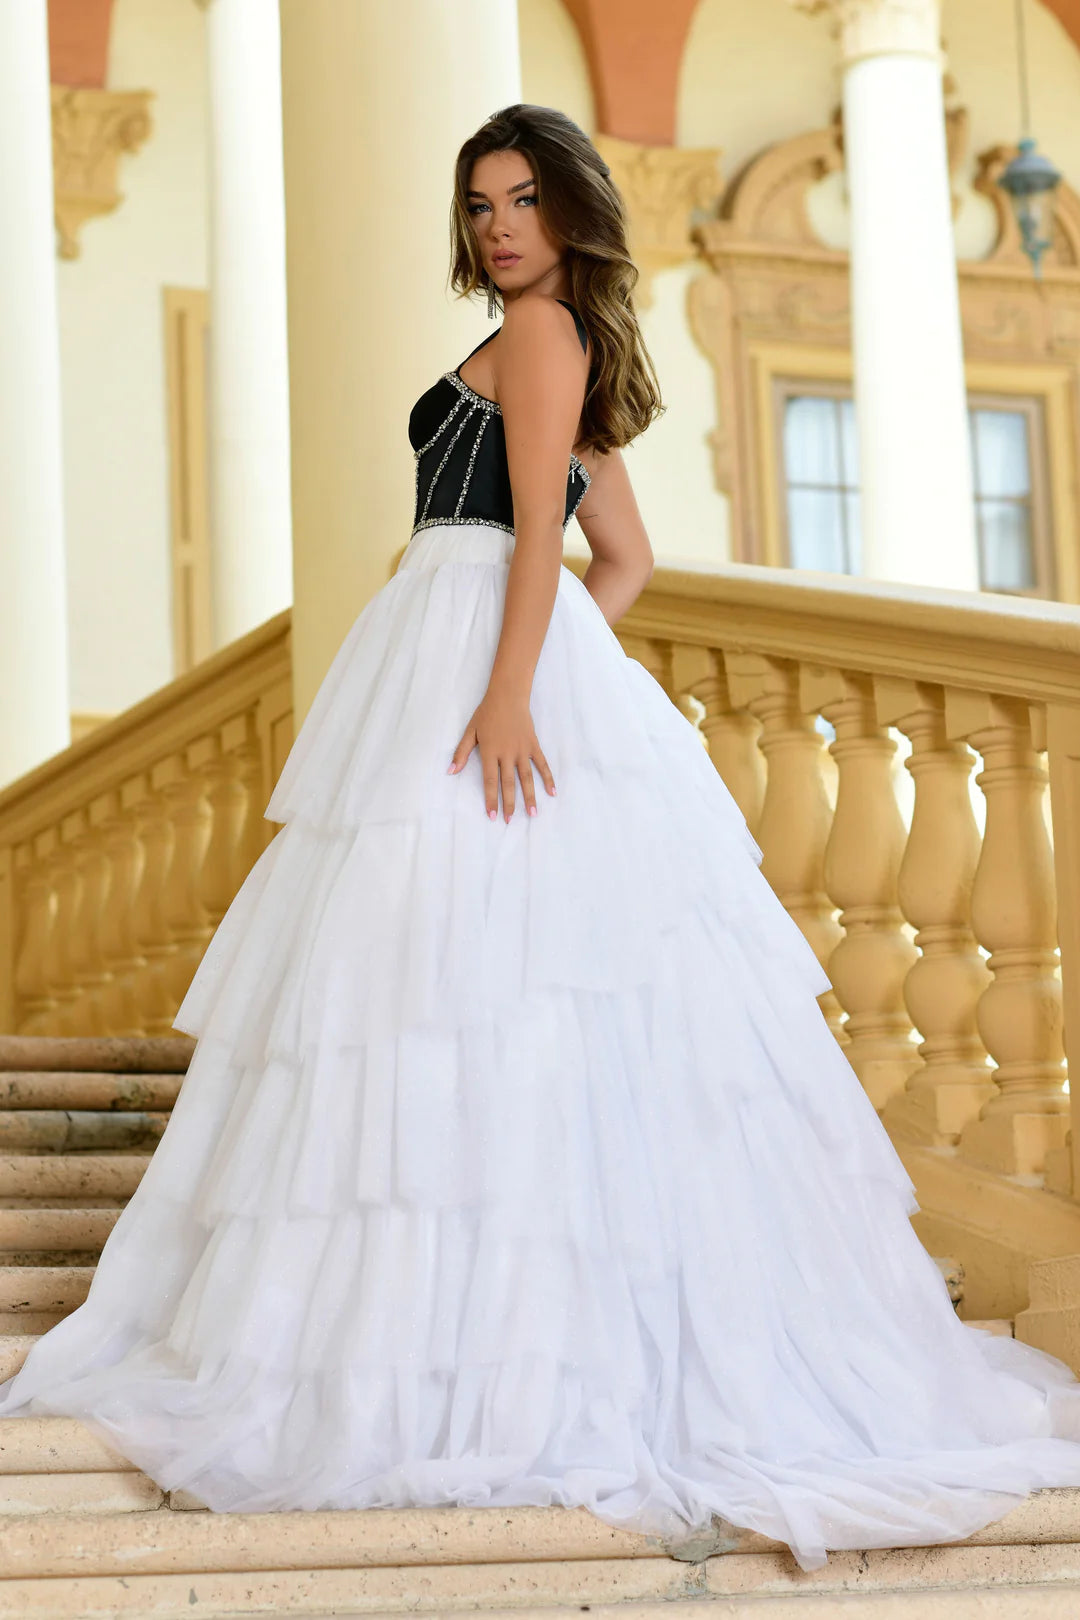 Step out in style with the Ava Presley 28592 Shimmer Tulle A Line Layer Ballgown Prom Dress. This stunning gown features a satin corset and crystal embellishments for a touch of elegance. The A-line silhouette and layered tulle skirt will make you feel like a princess. Perfect for prom or any special occasion.  Sizes: 00-16  Colors: Lilac, Black/White